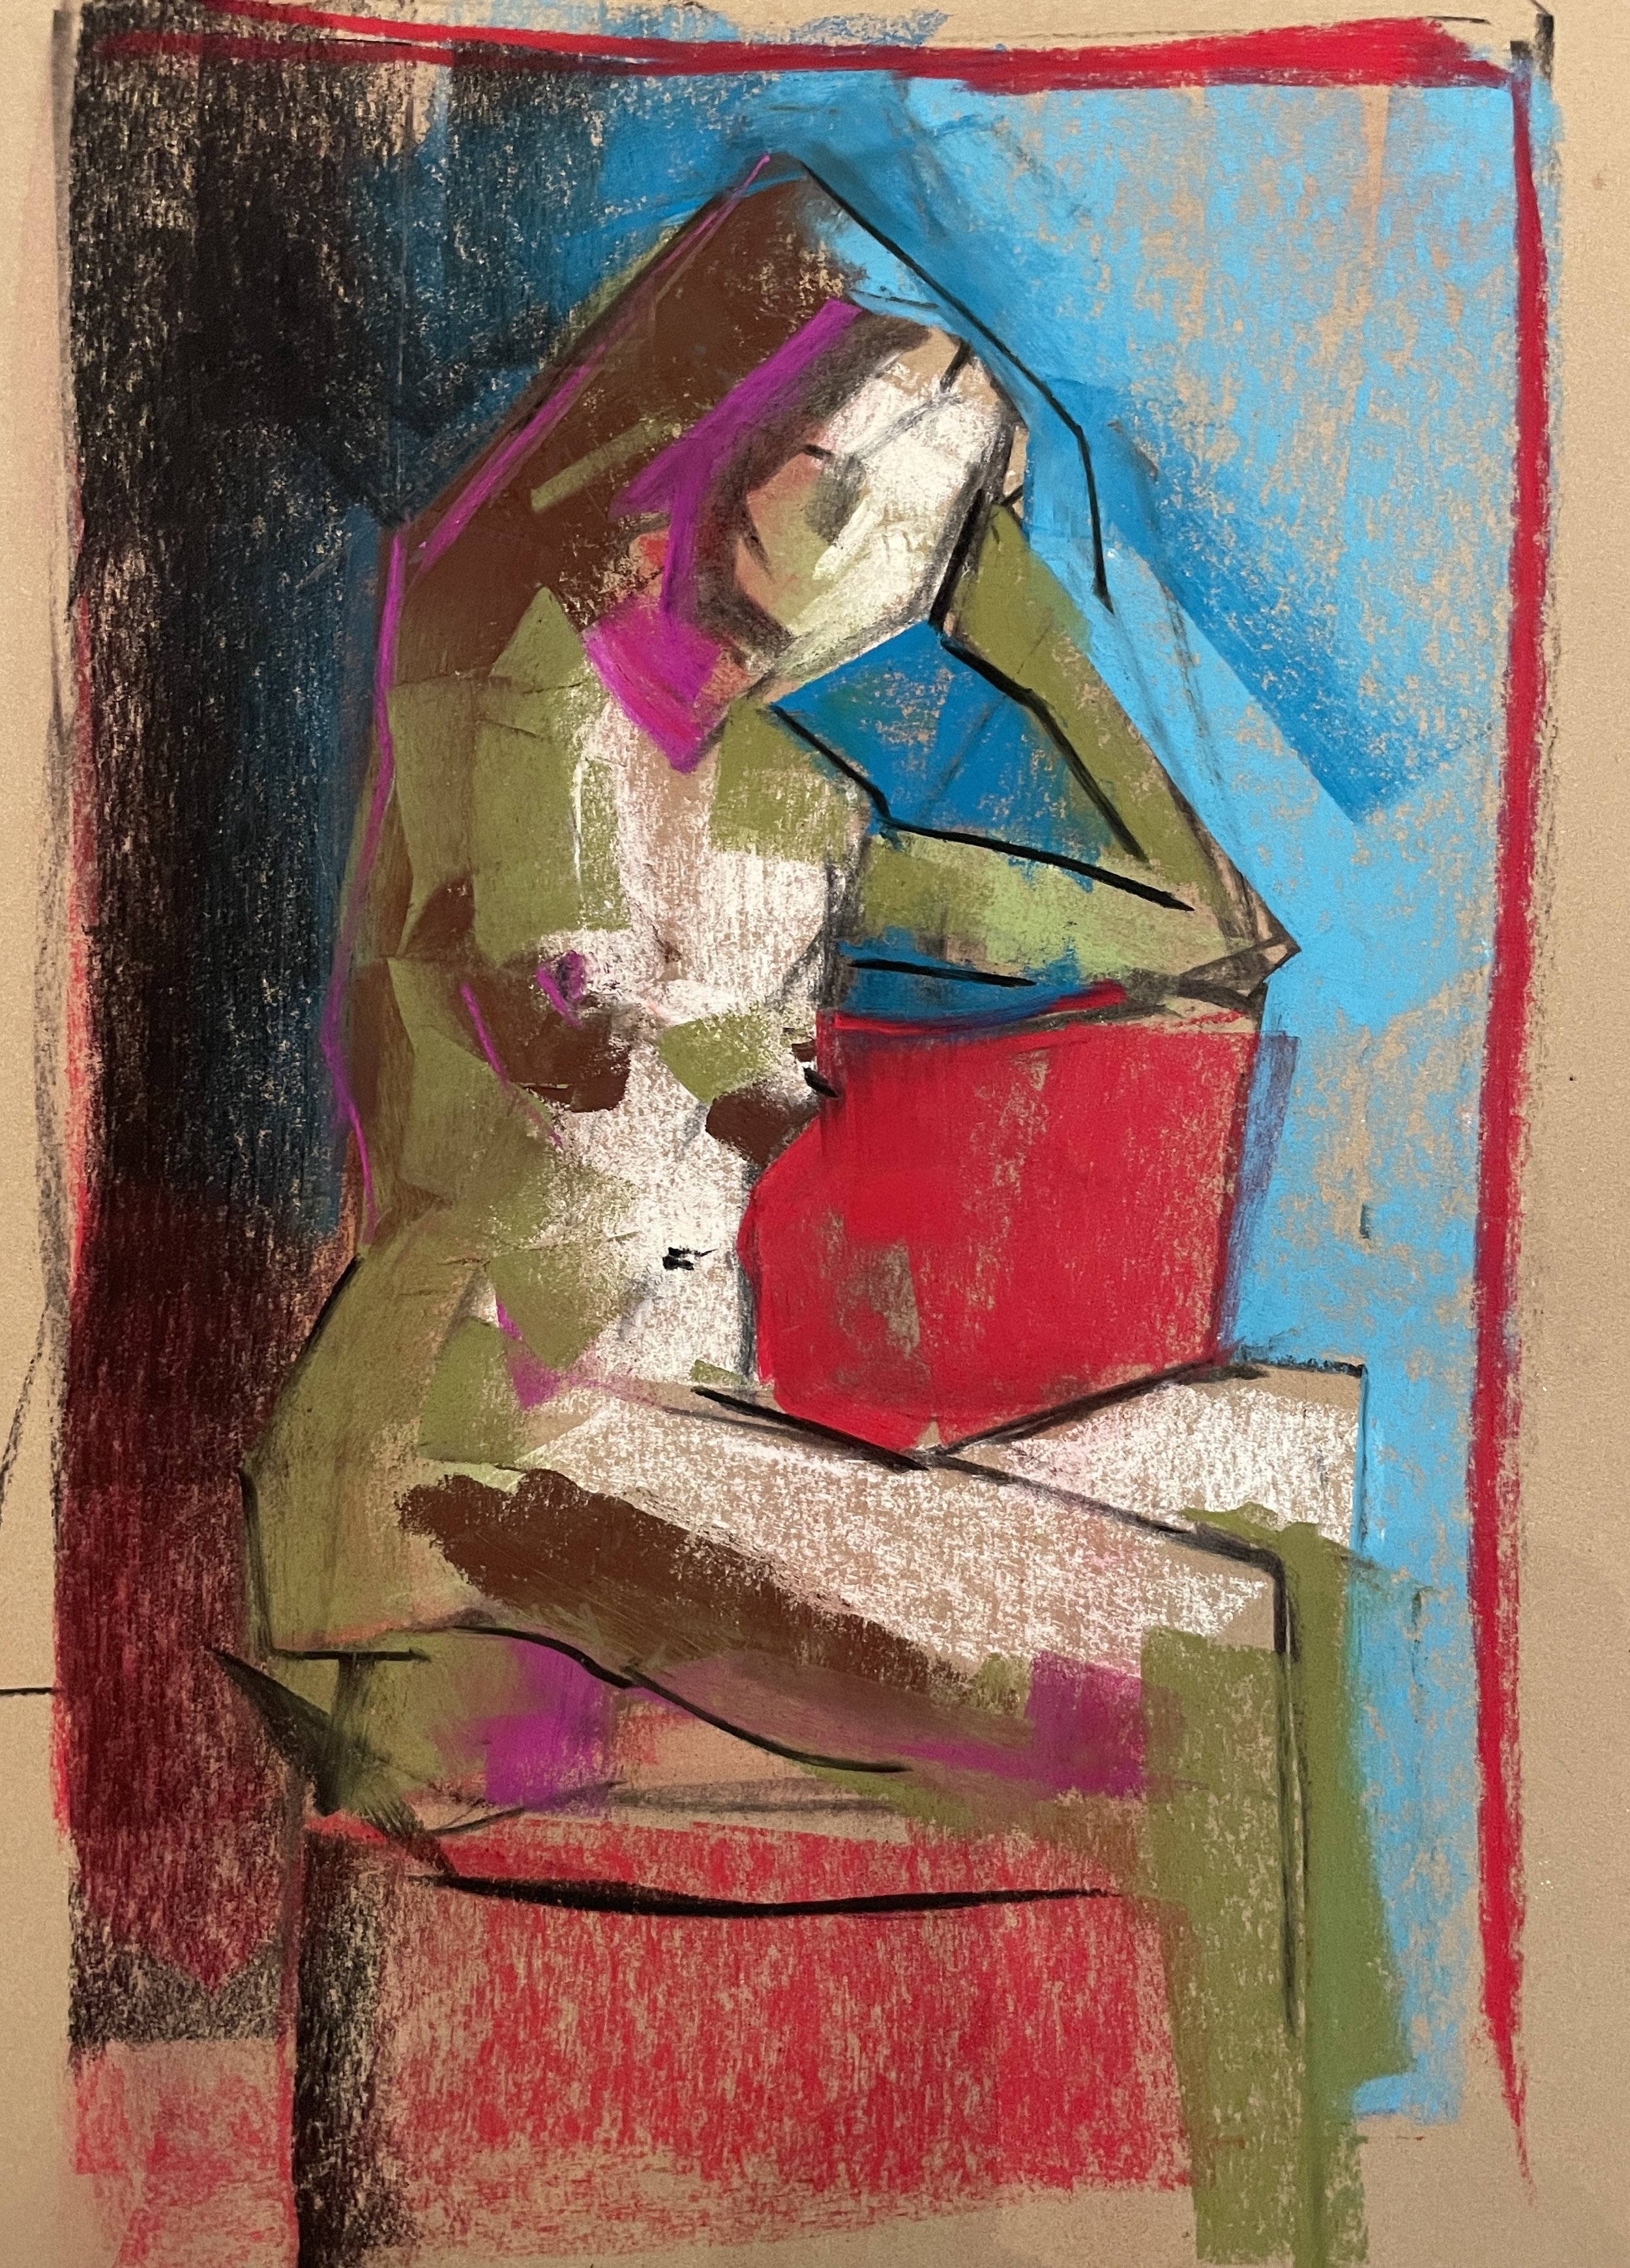 E.C. Seated, Pastel, 12 by 15 inches, 2022.